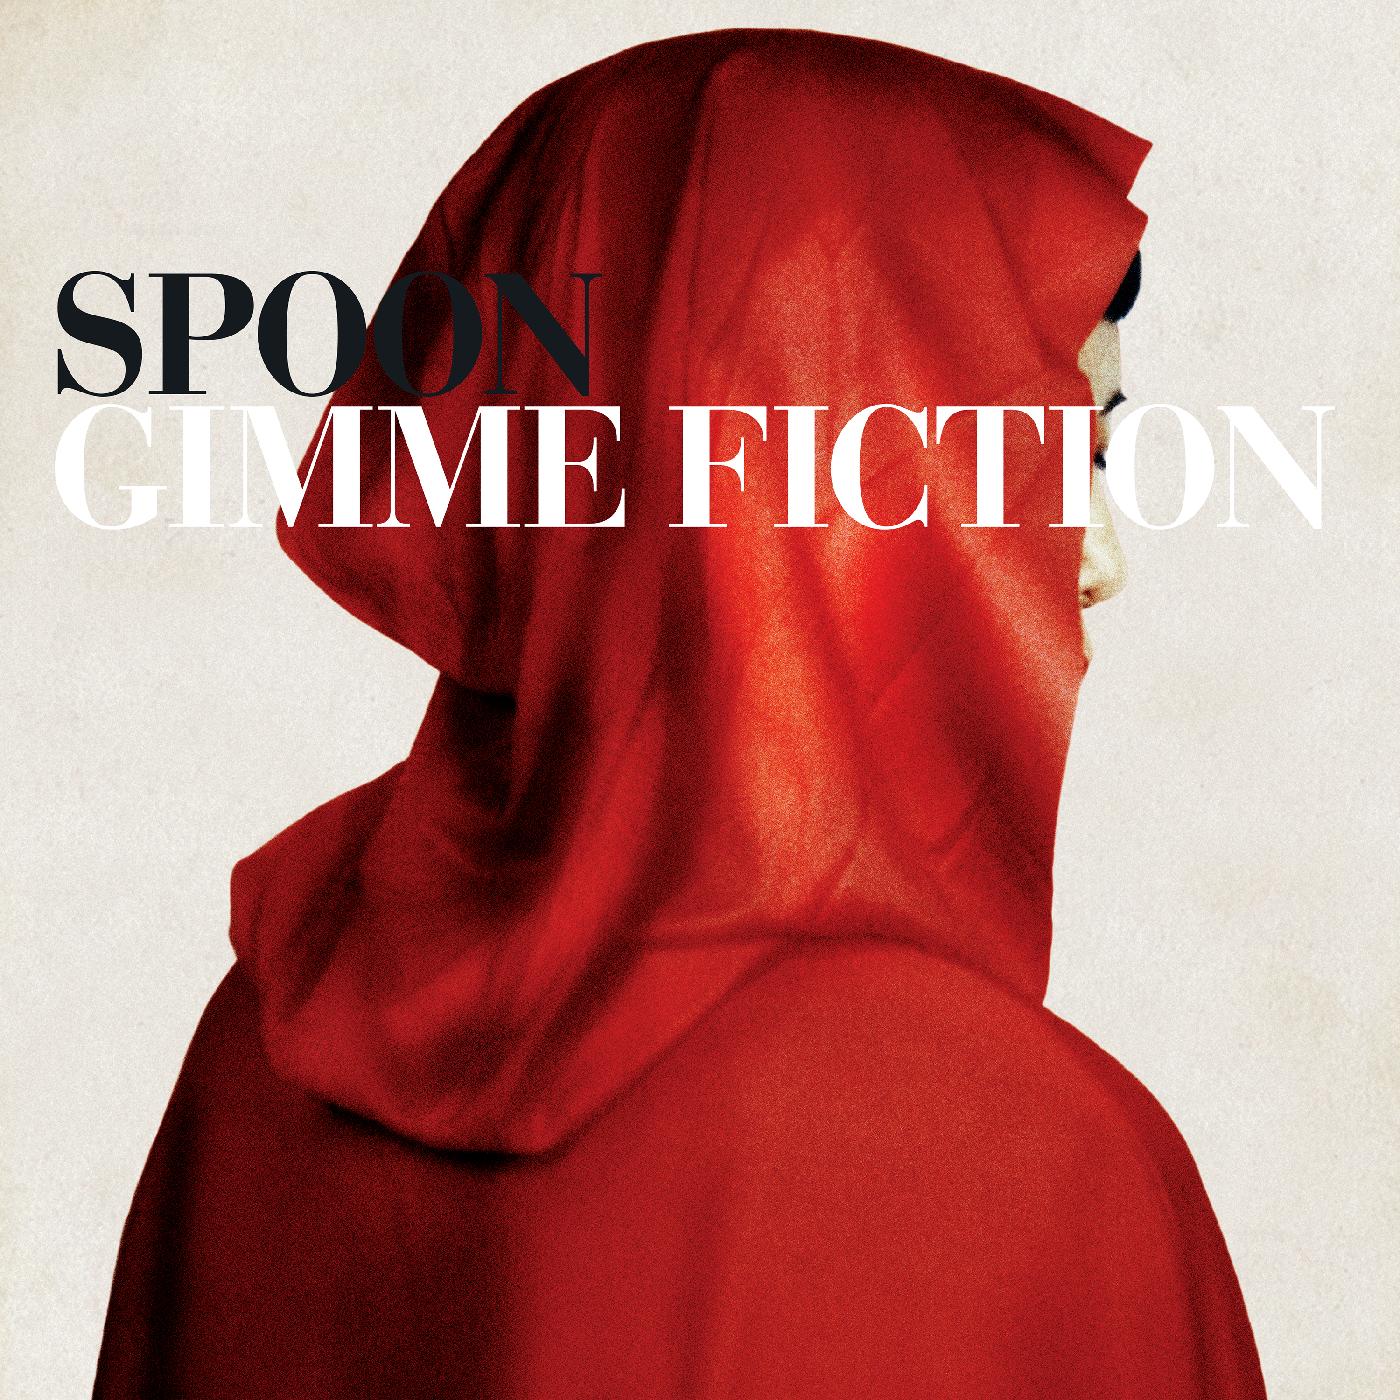 Spoon | Gimme Fiction | Indie & Alternative